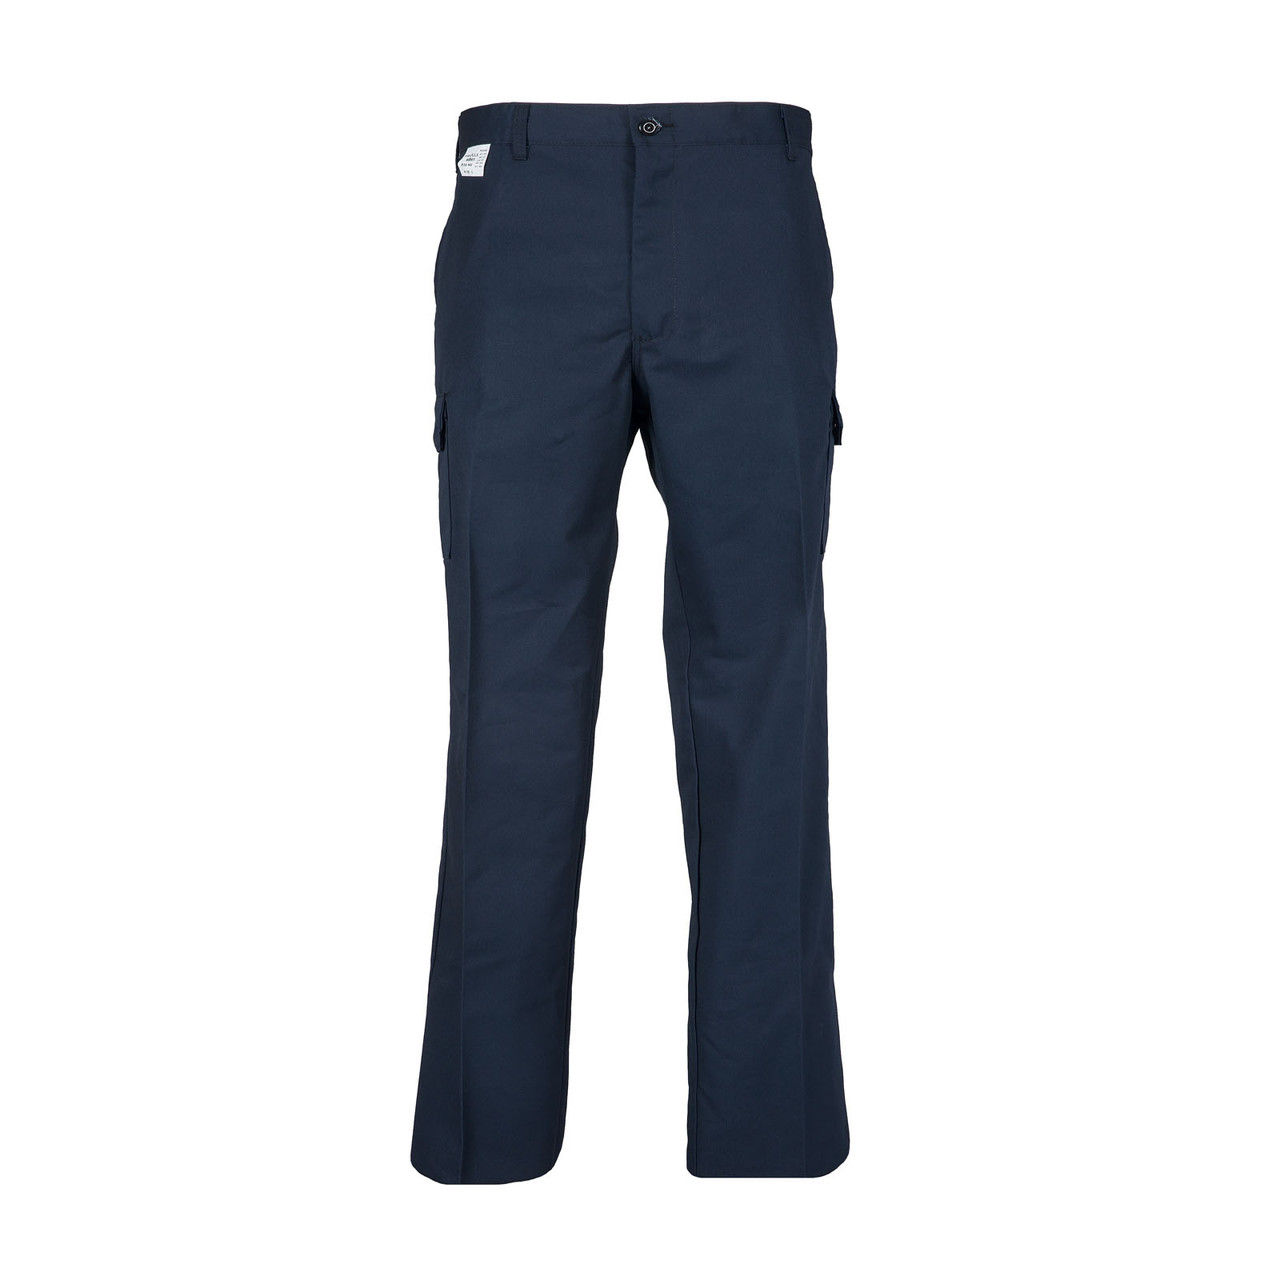 What's the origin and transit time for shipping the navy blue work pants P24NV?